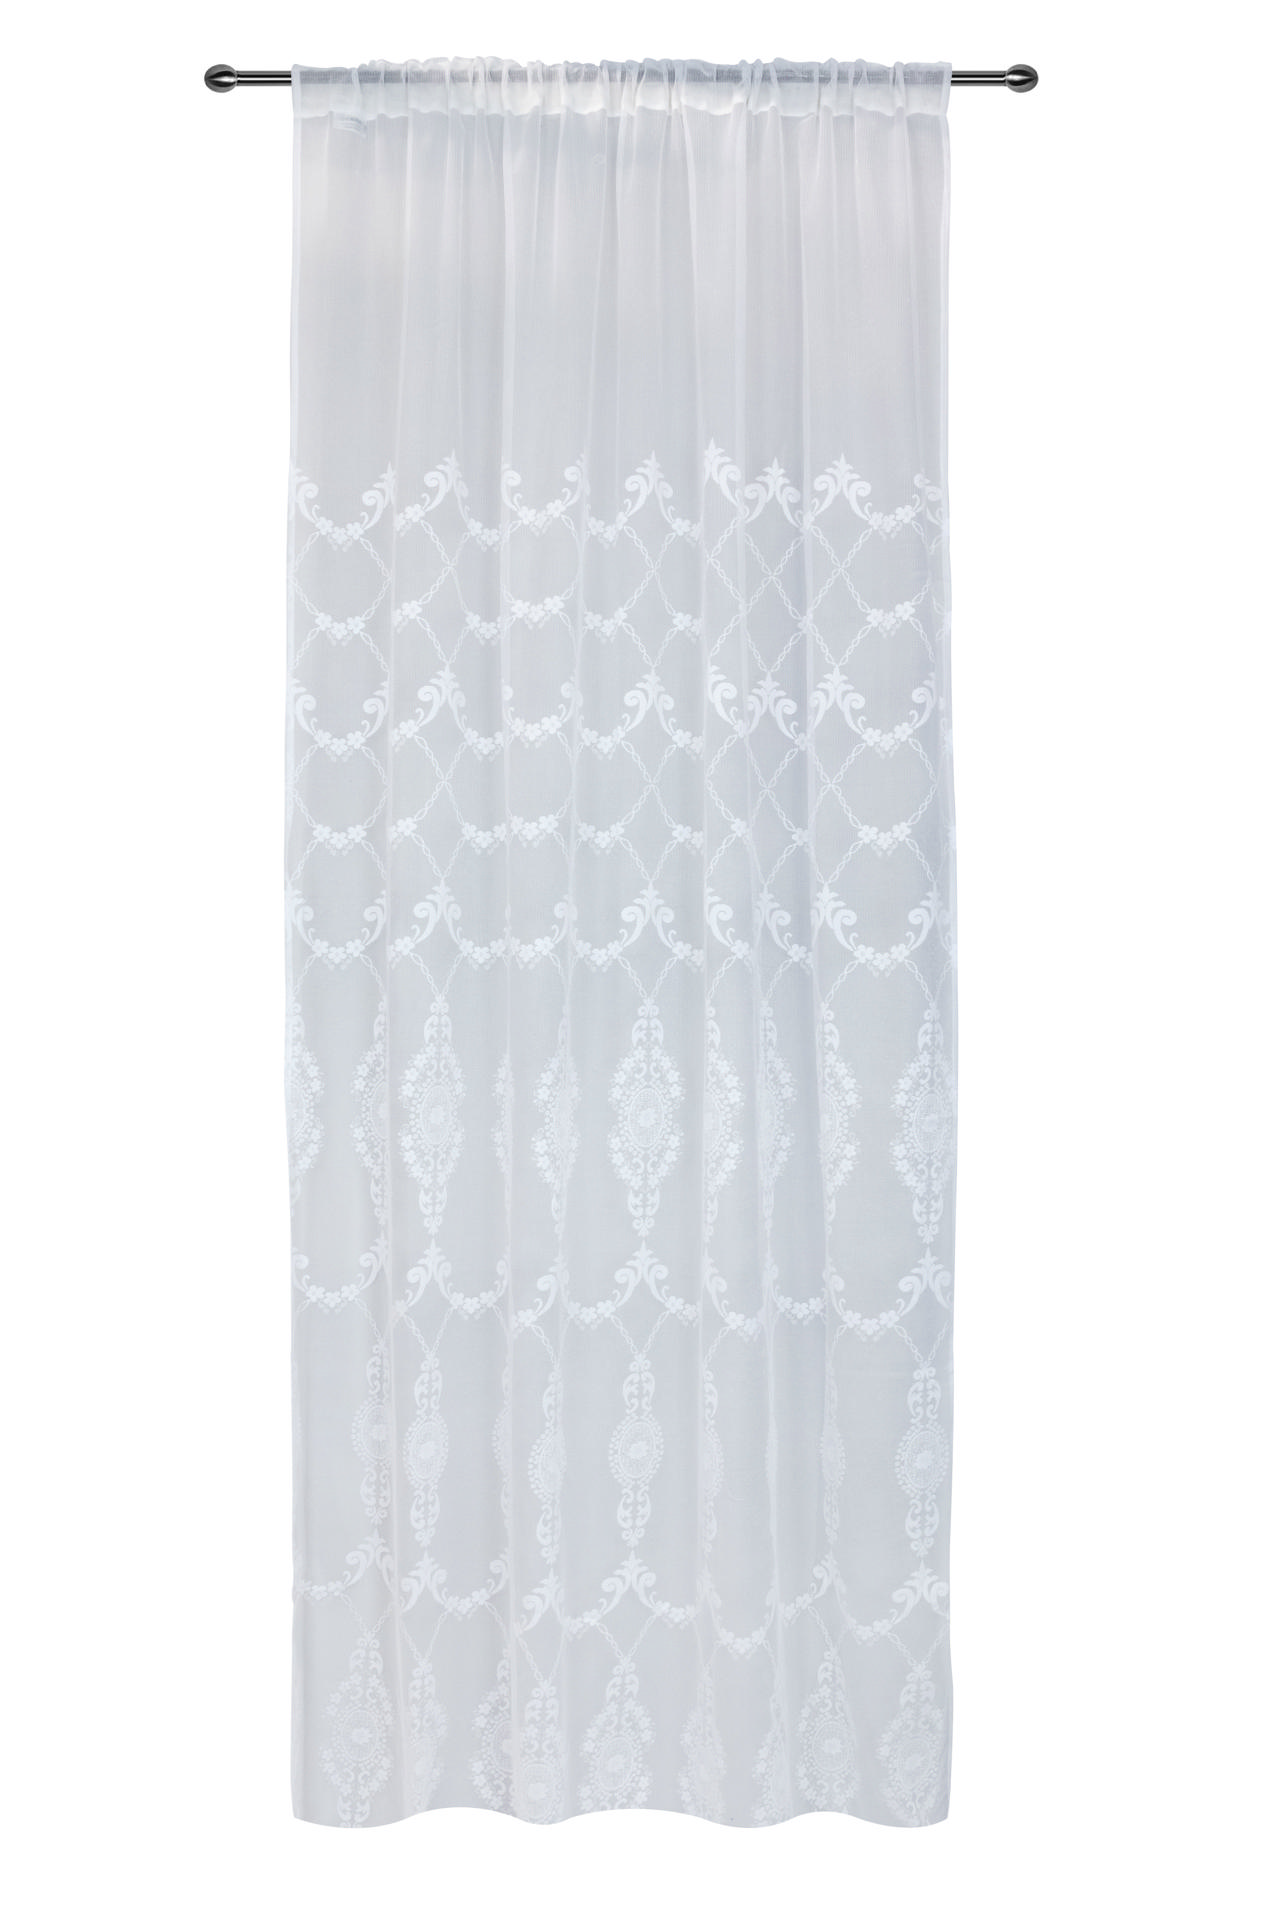 EASY HOME CURTAIN 140X270CM CORDON WITH TRACE WHITE